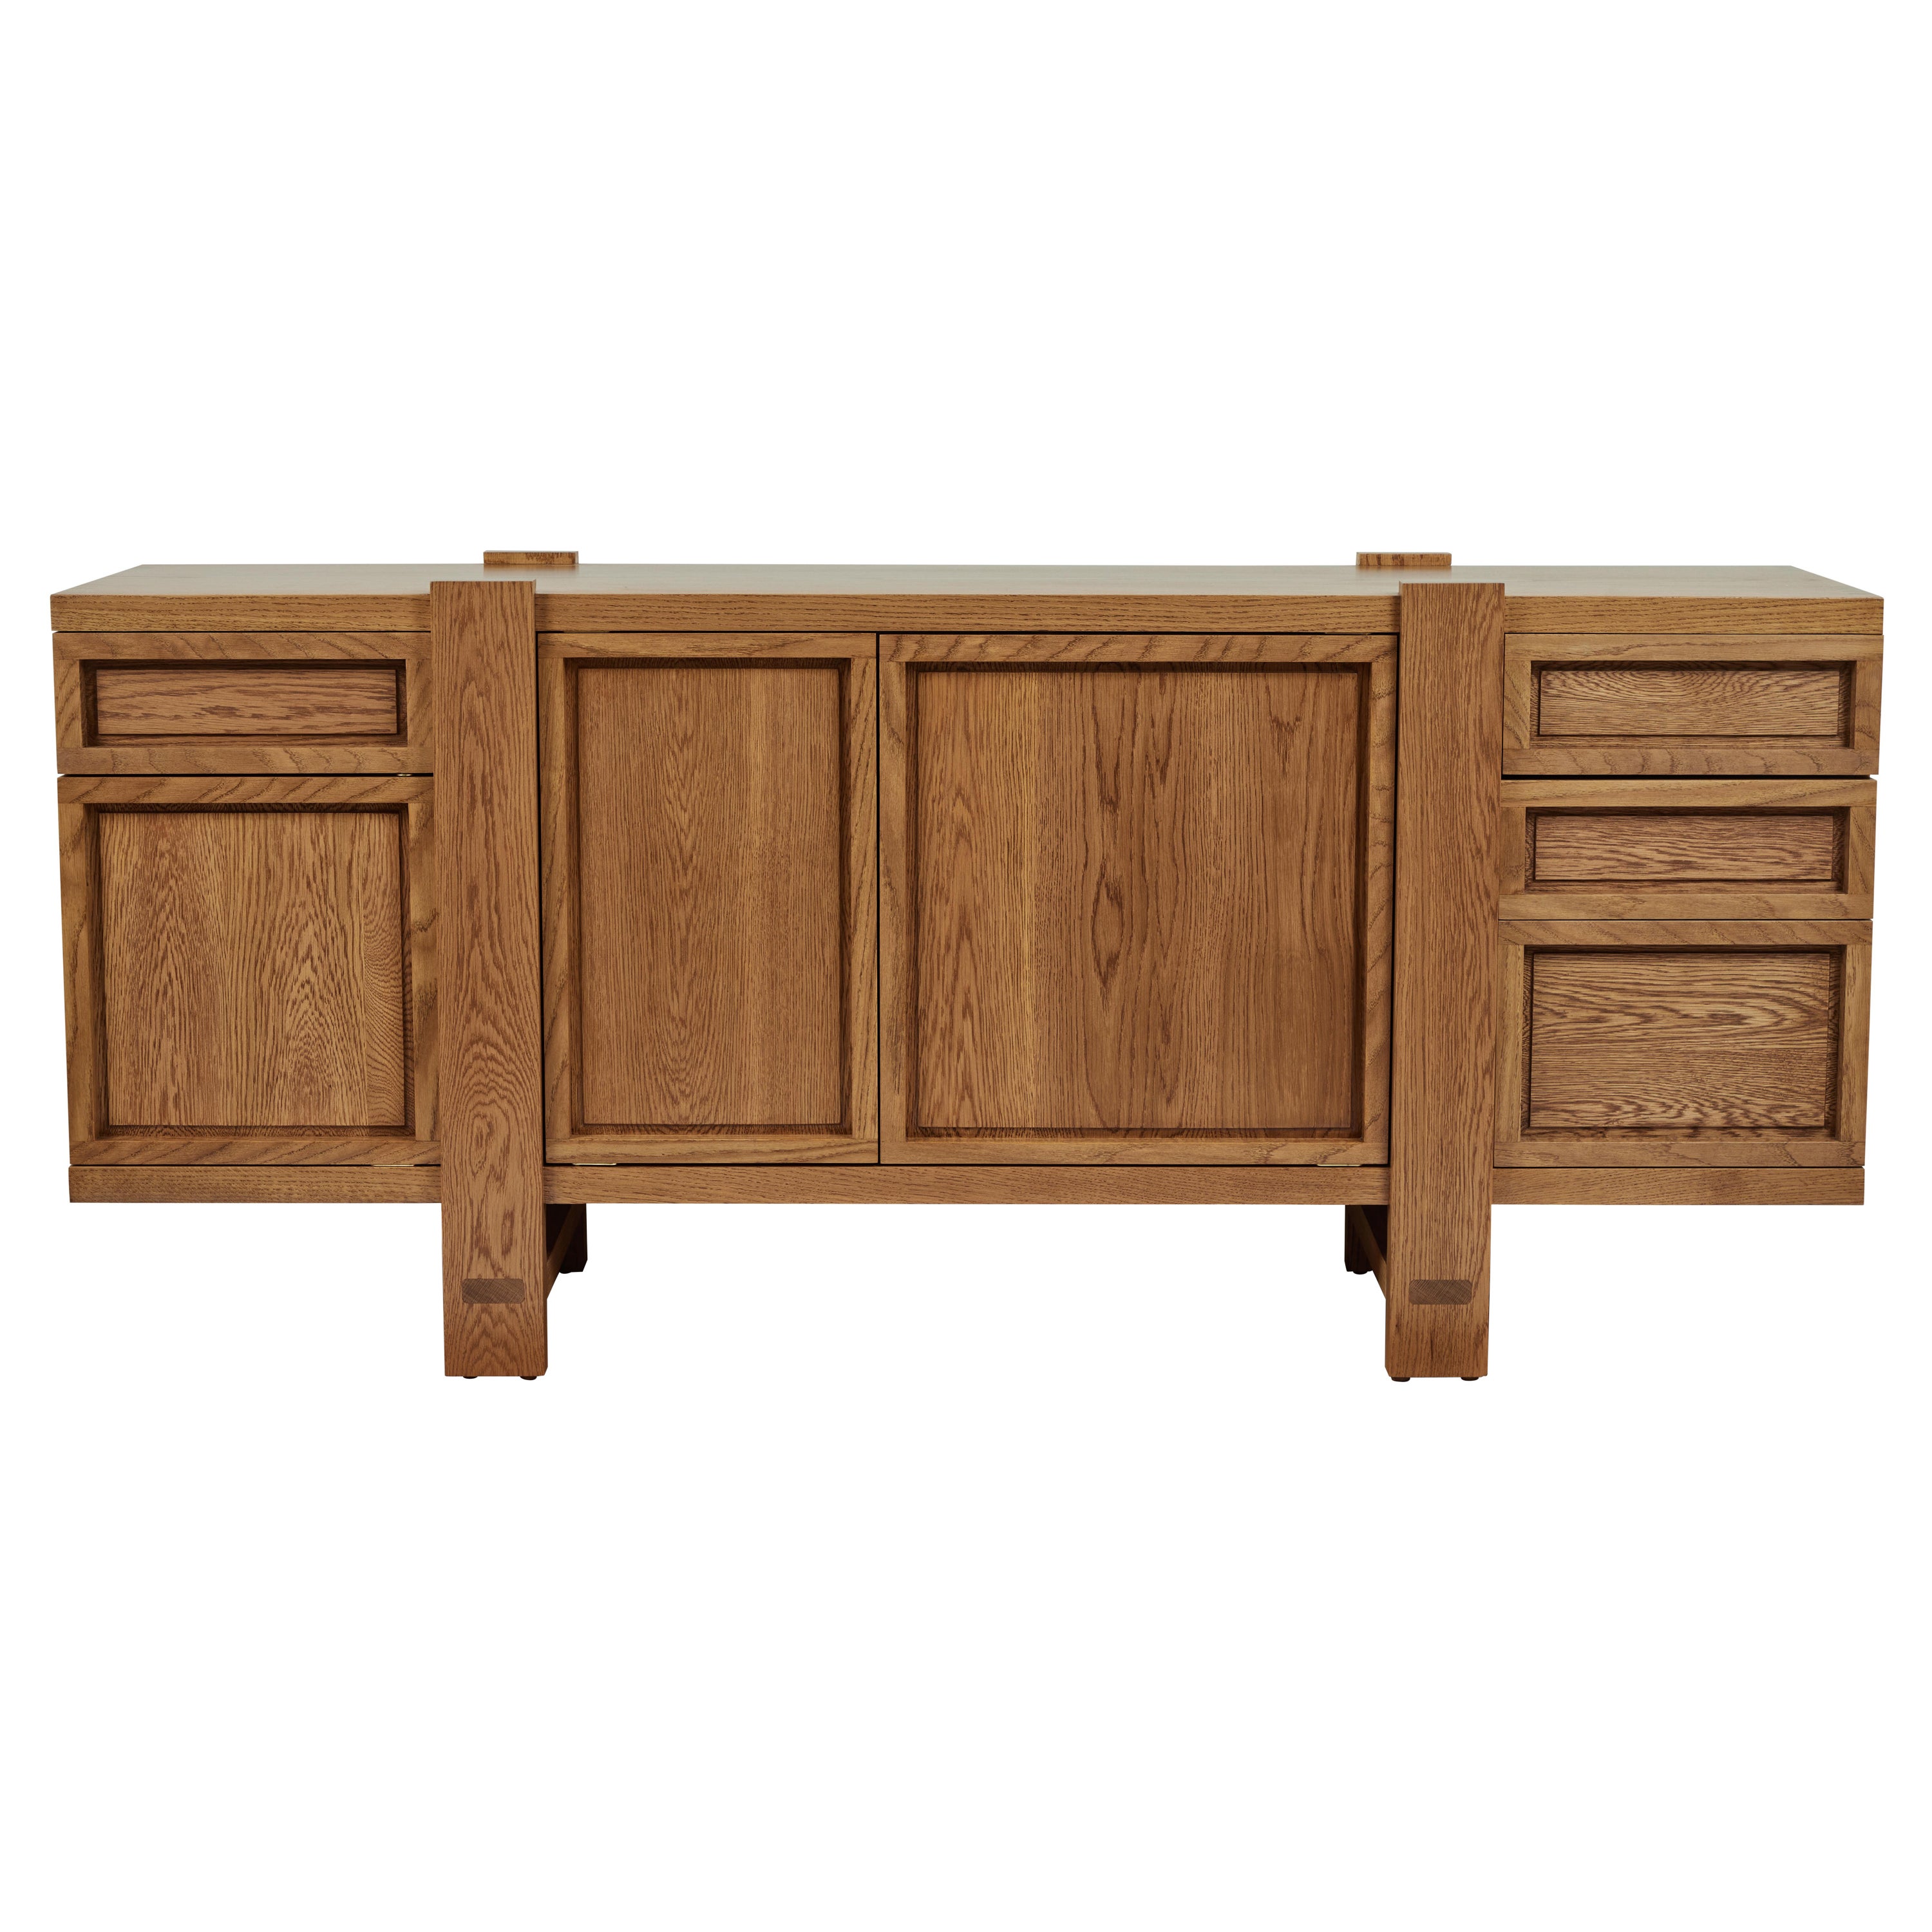 Lake Sideboard, in Summer Aged White Oak, by August Abode